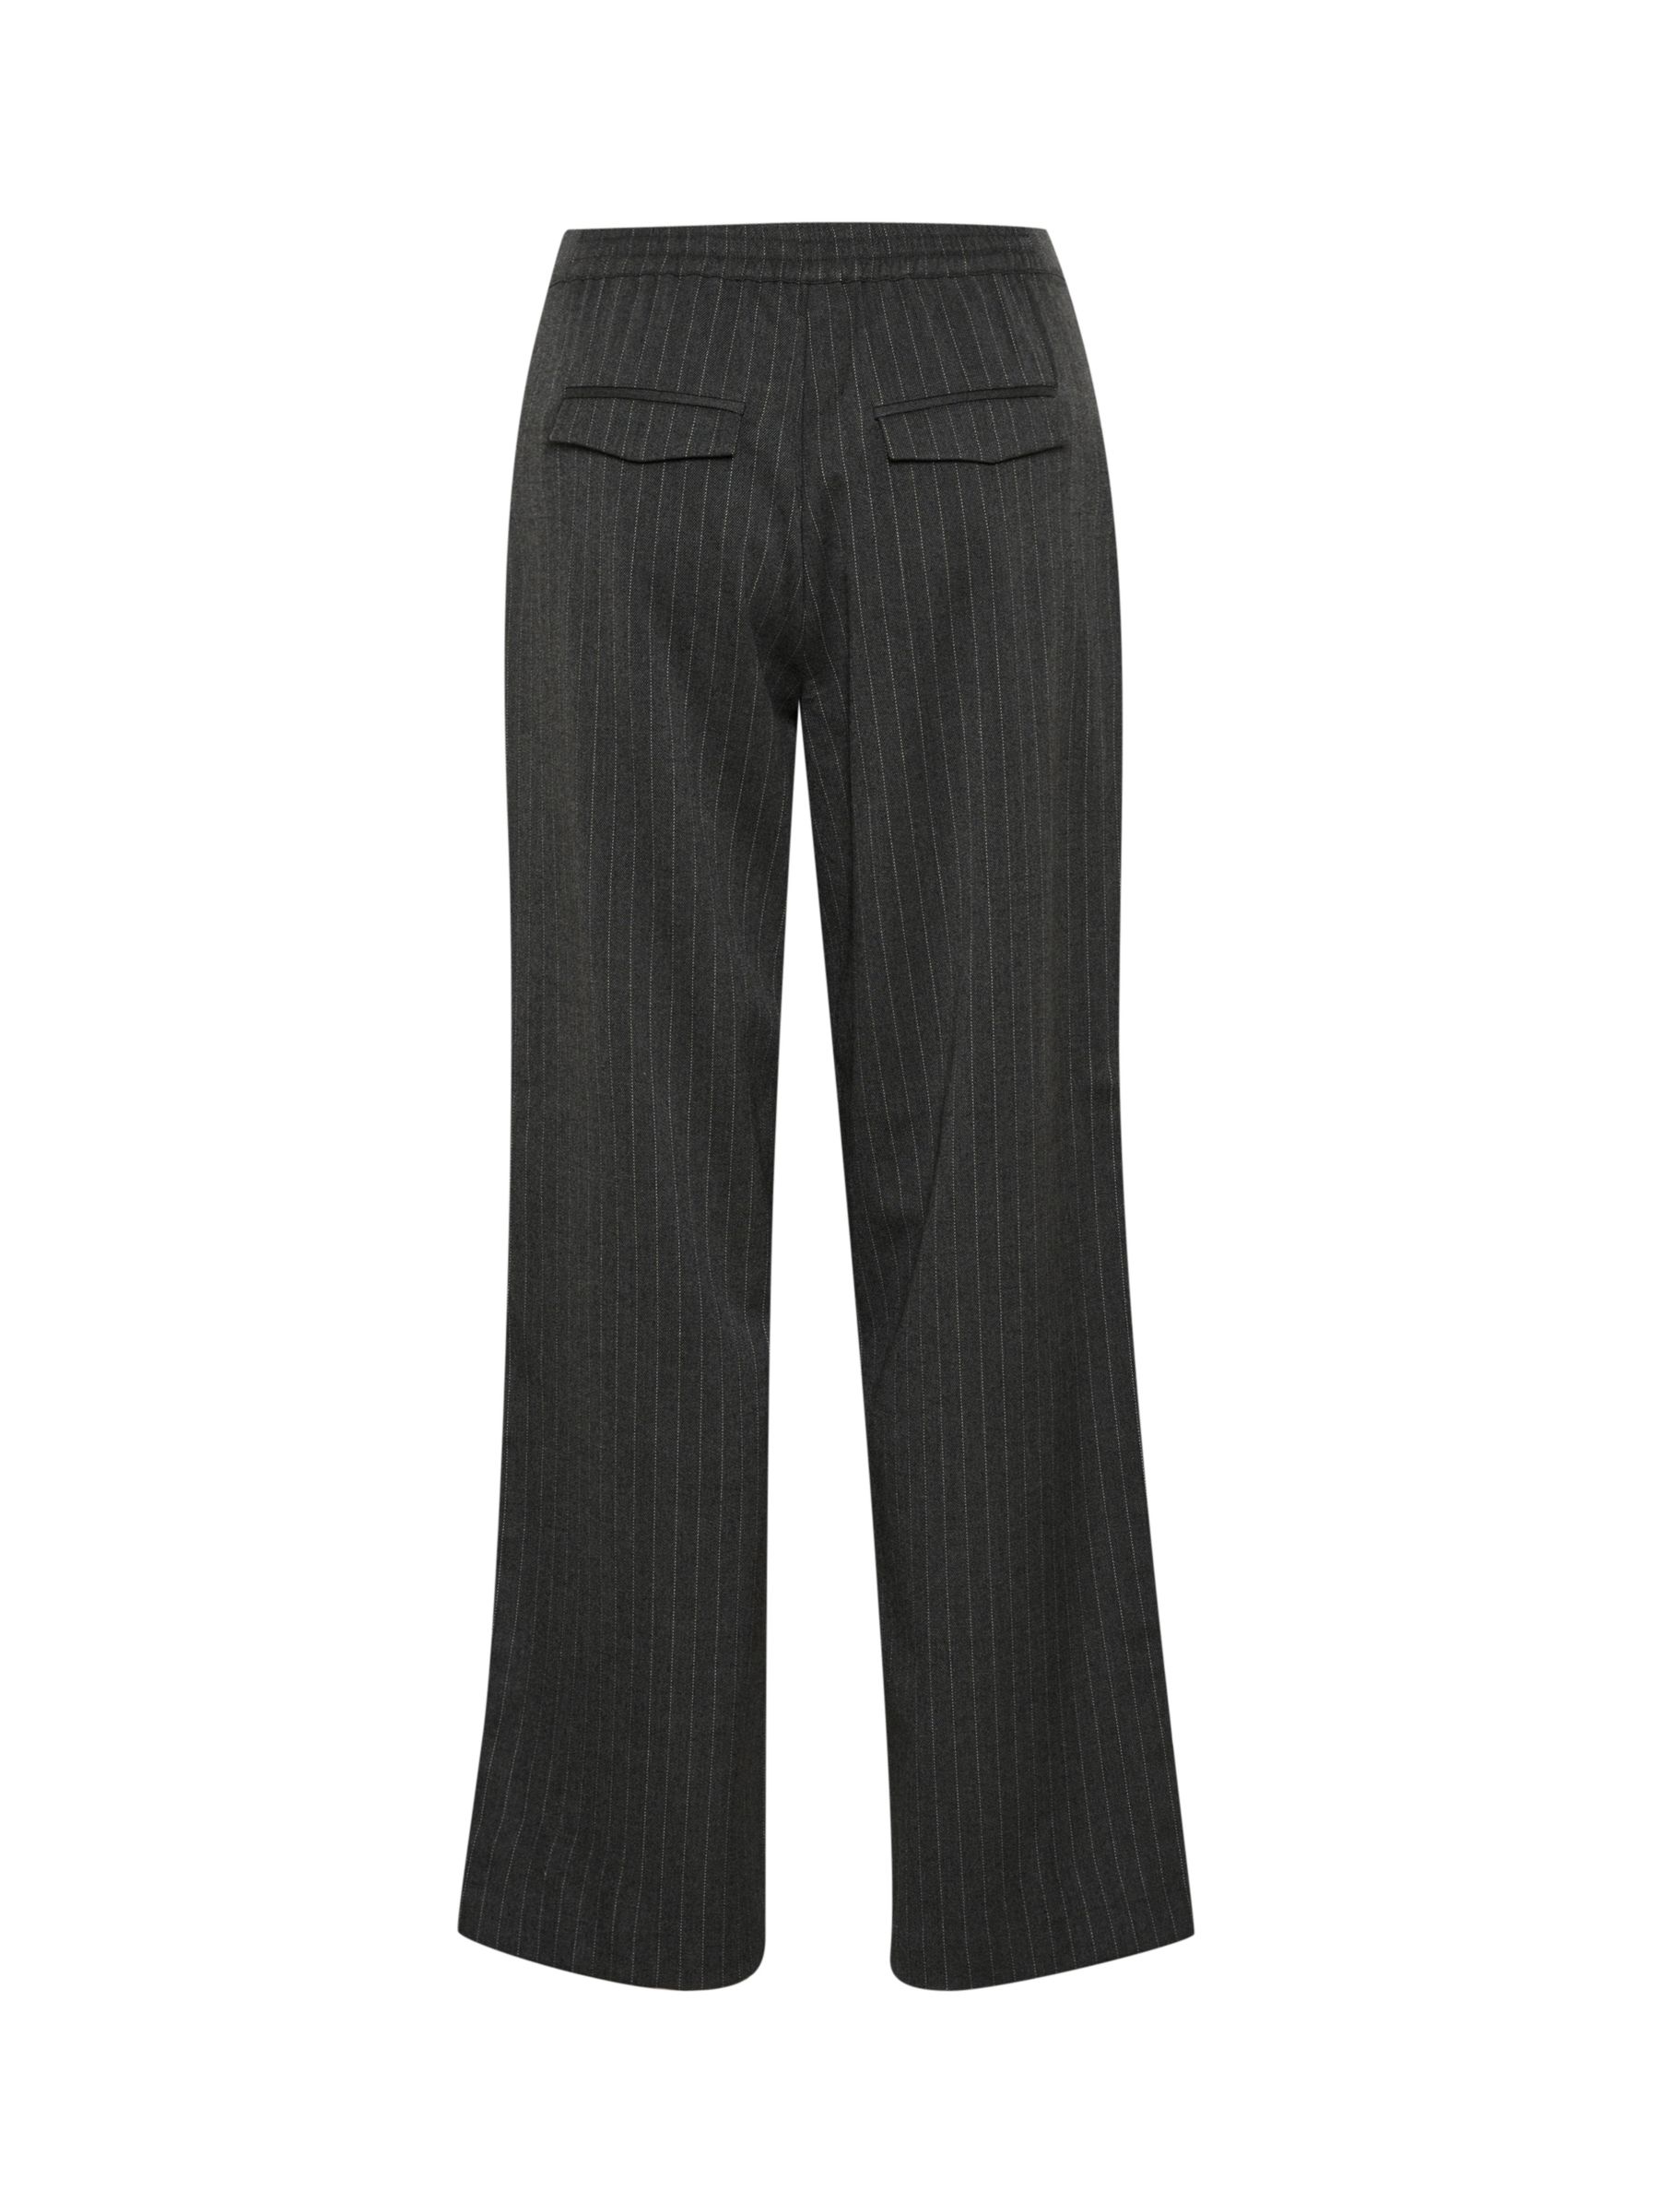 Buy Saint Tropez Xina Pinstripe Trousers, Forged Iron Online at johnlewis.com